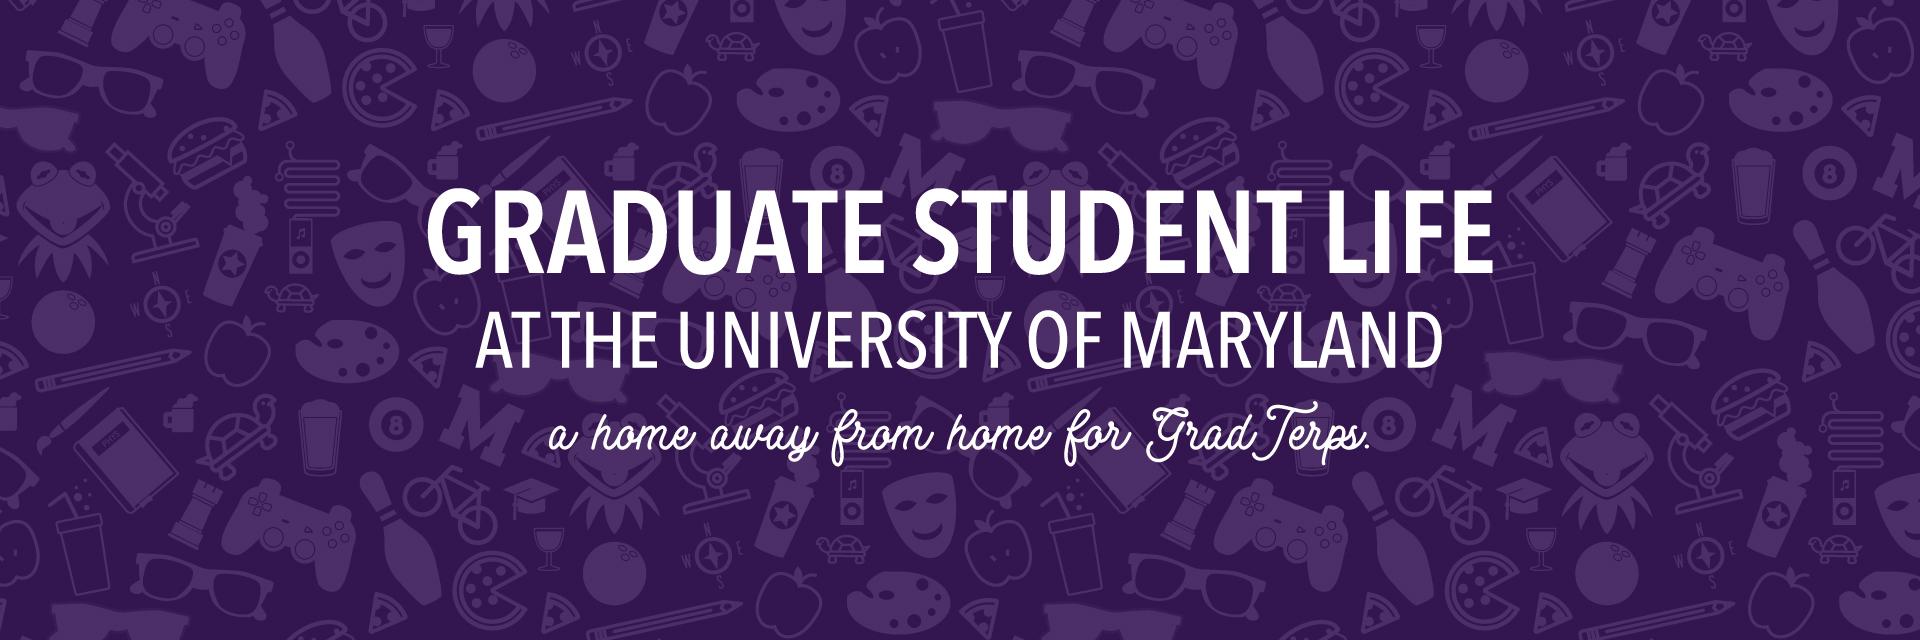 Graduate Student Life at the University of Maryland